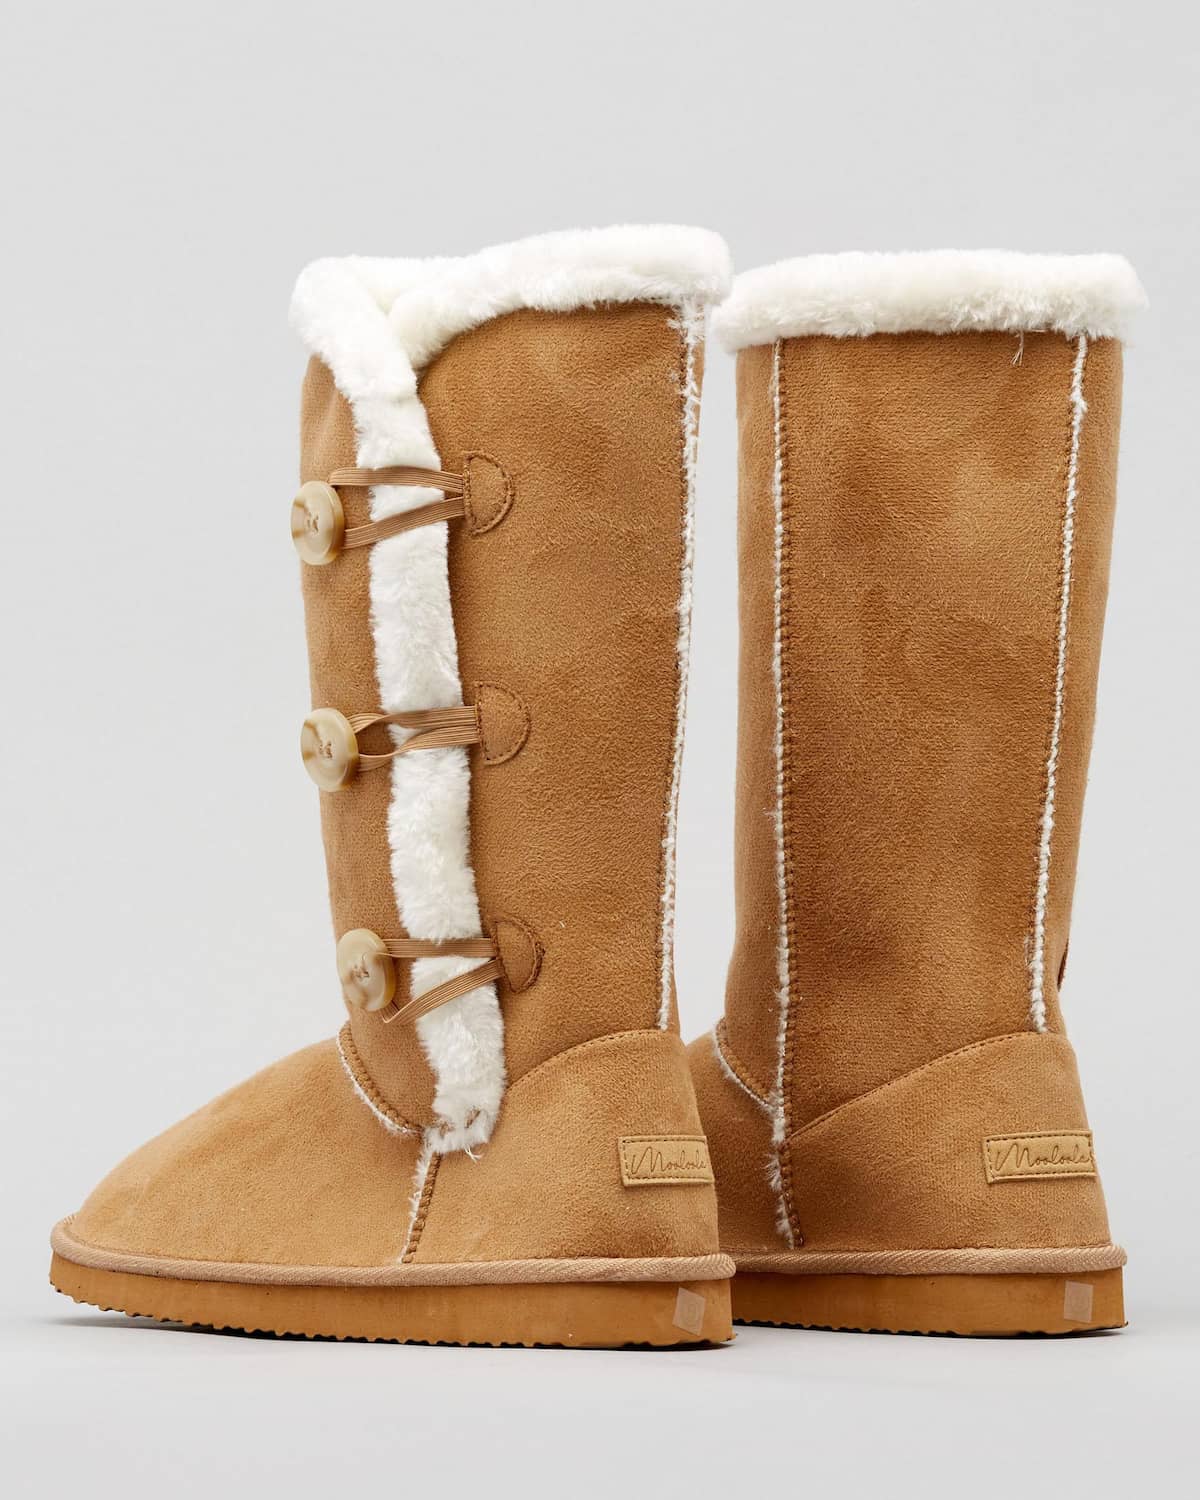 A pair of tall vegan Ugg-style slipper boots with a faux fur lining.